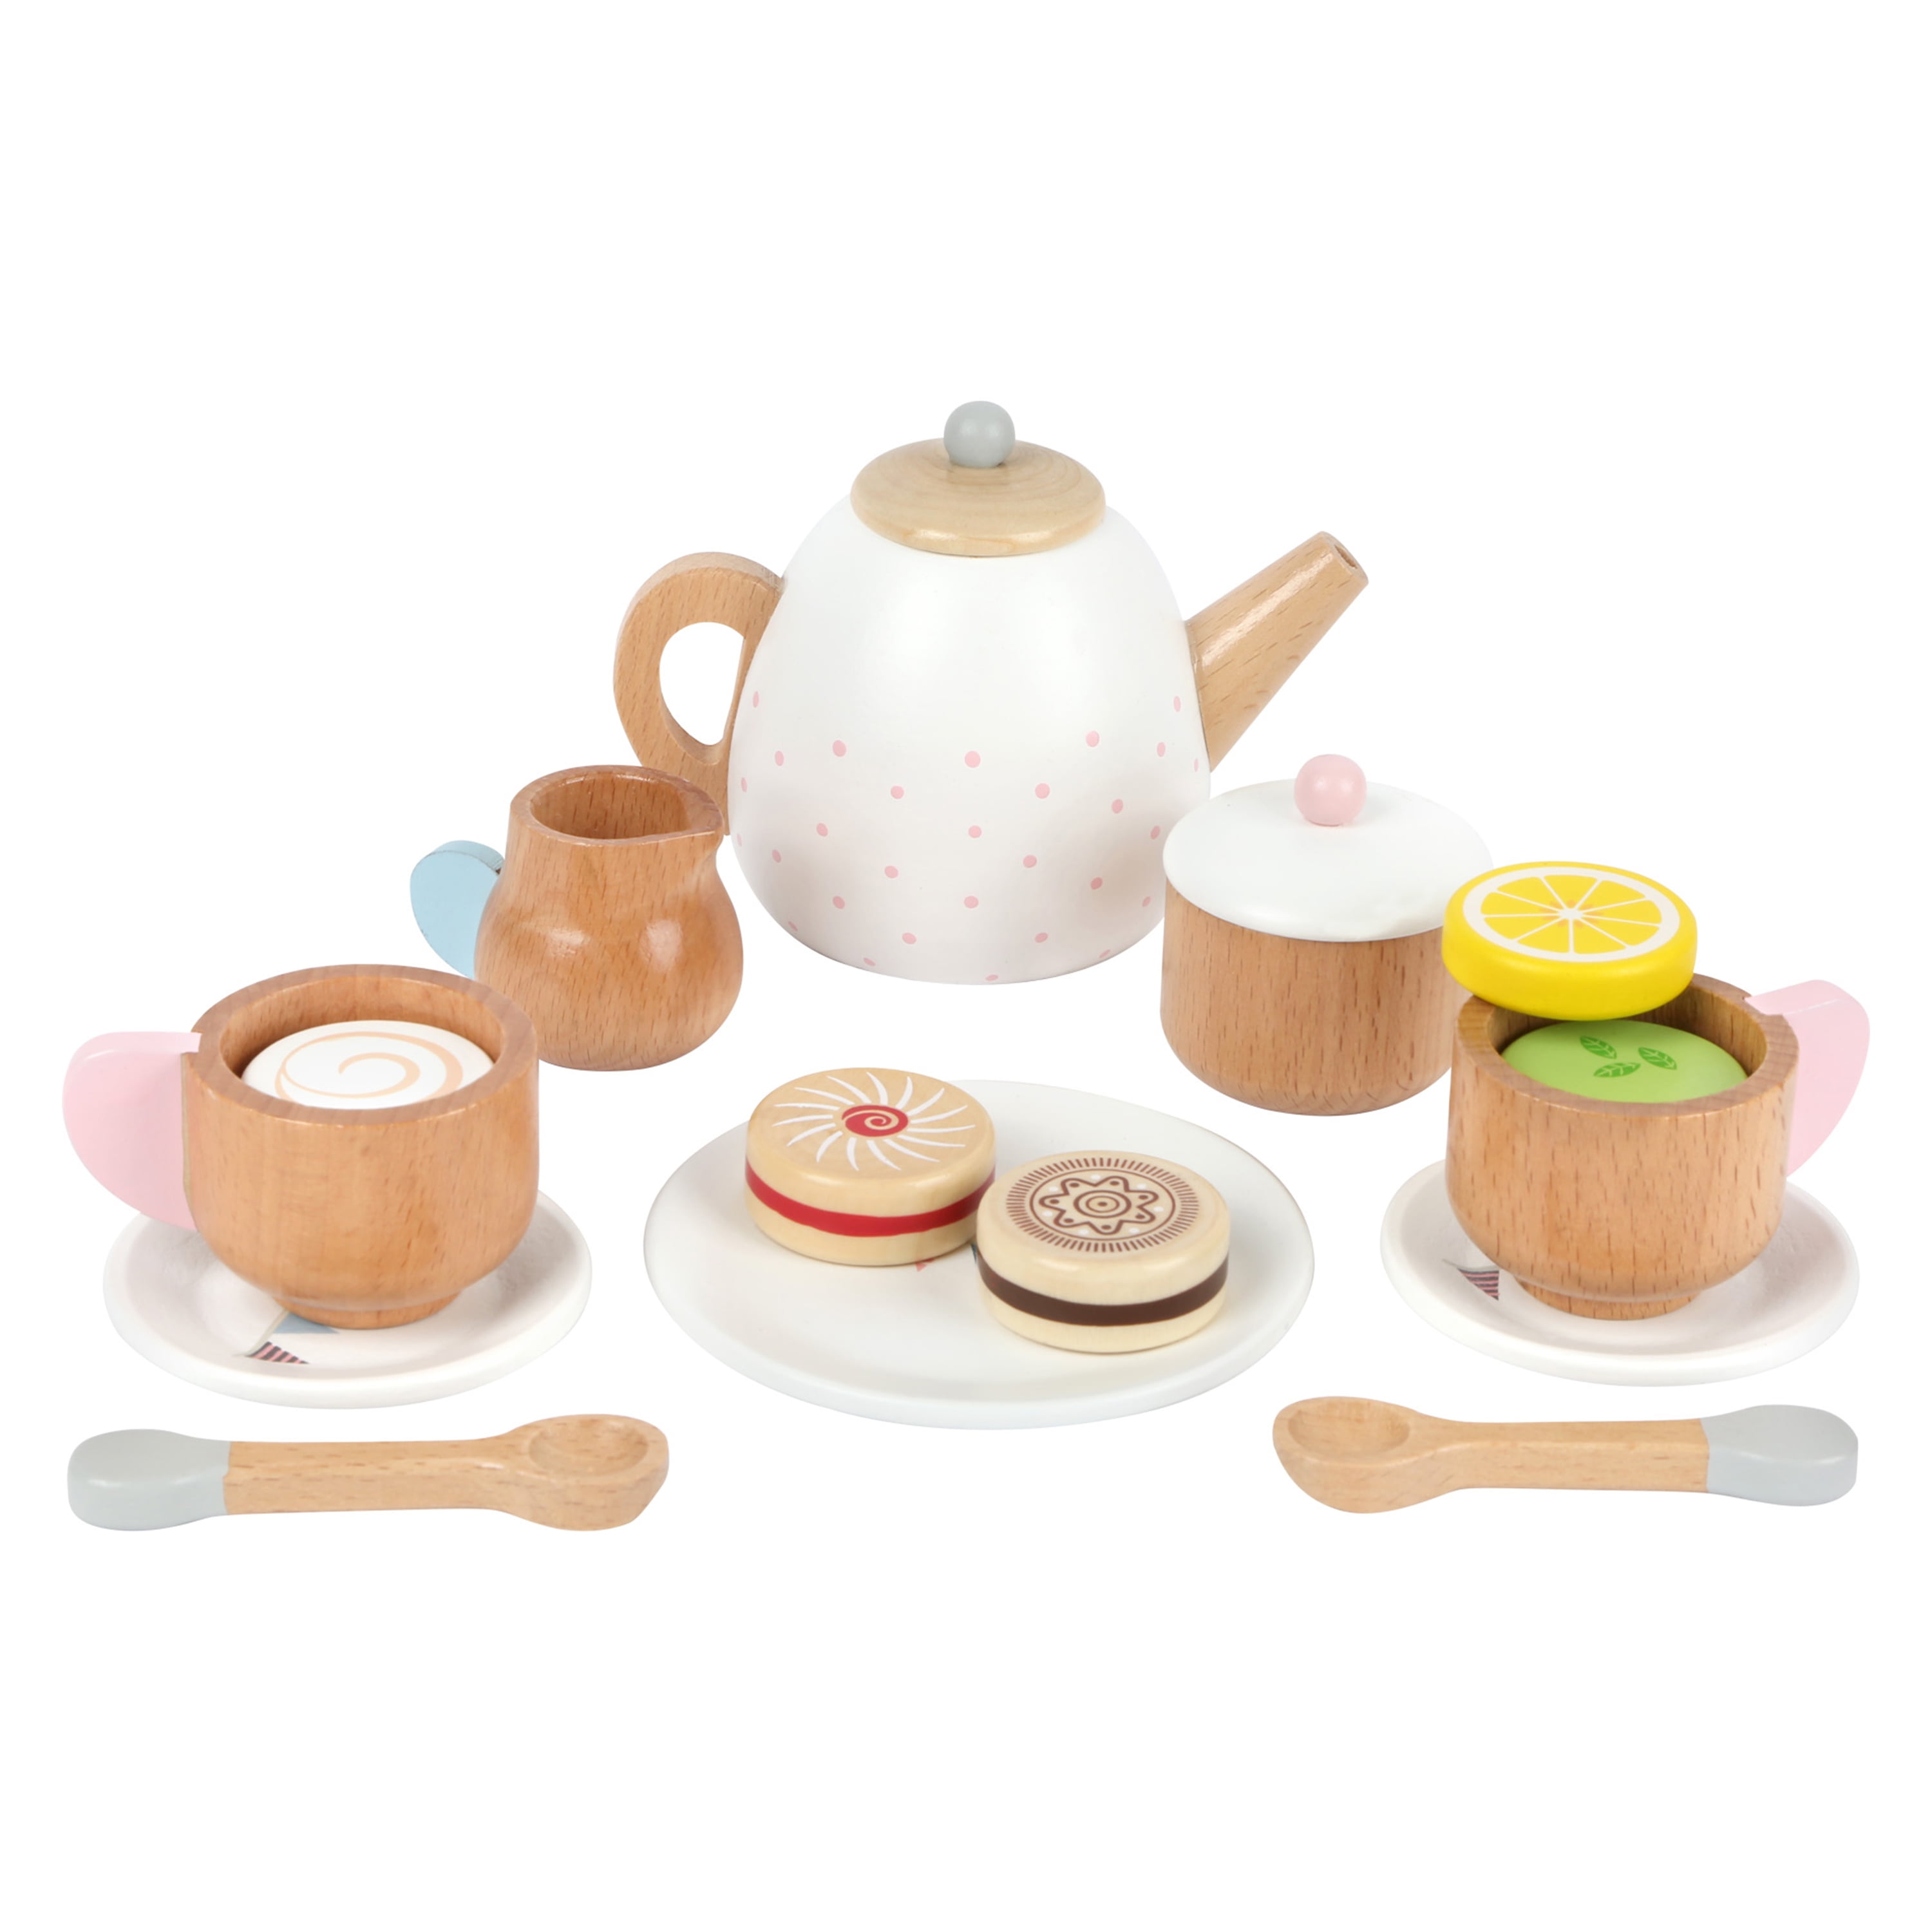 Small Foot Wooden Toys - Play Tea Party 17 Piece Set